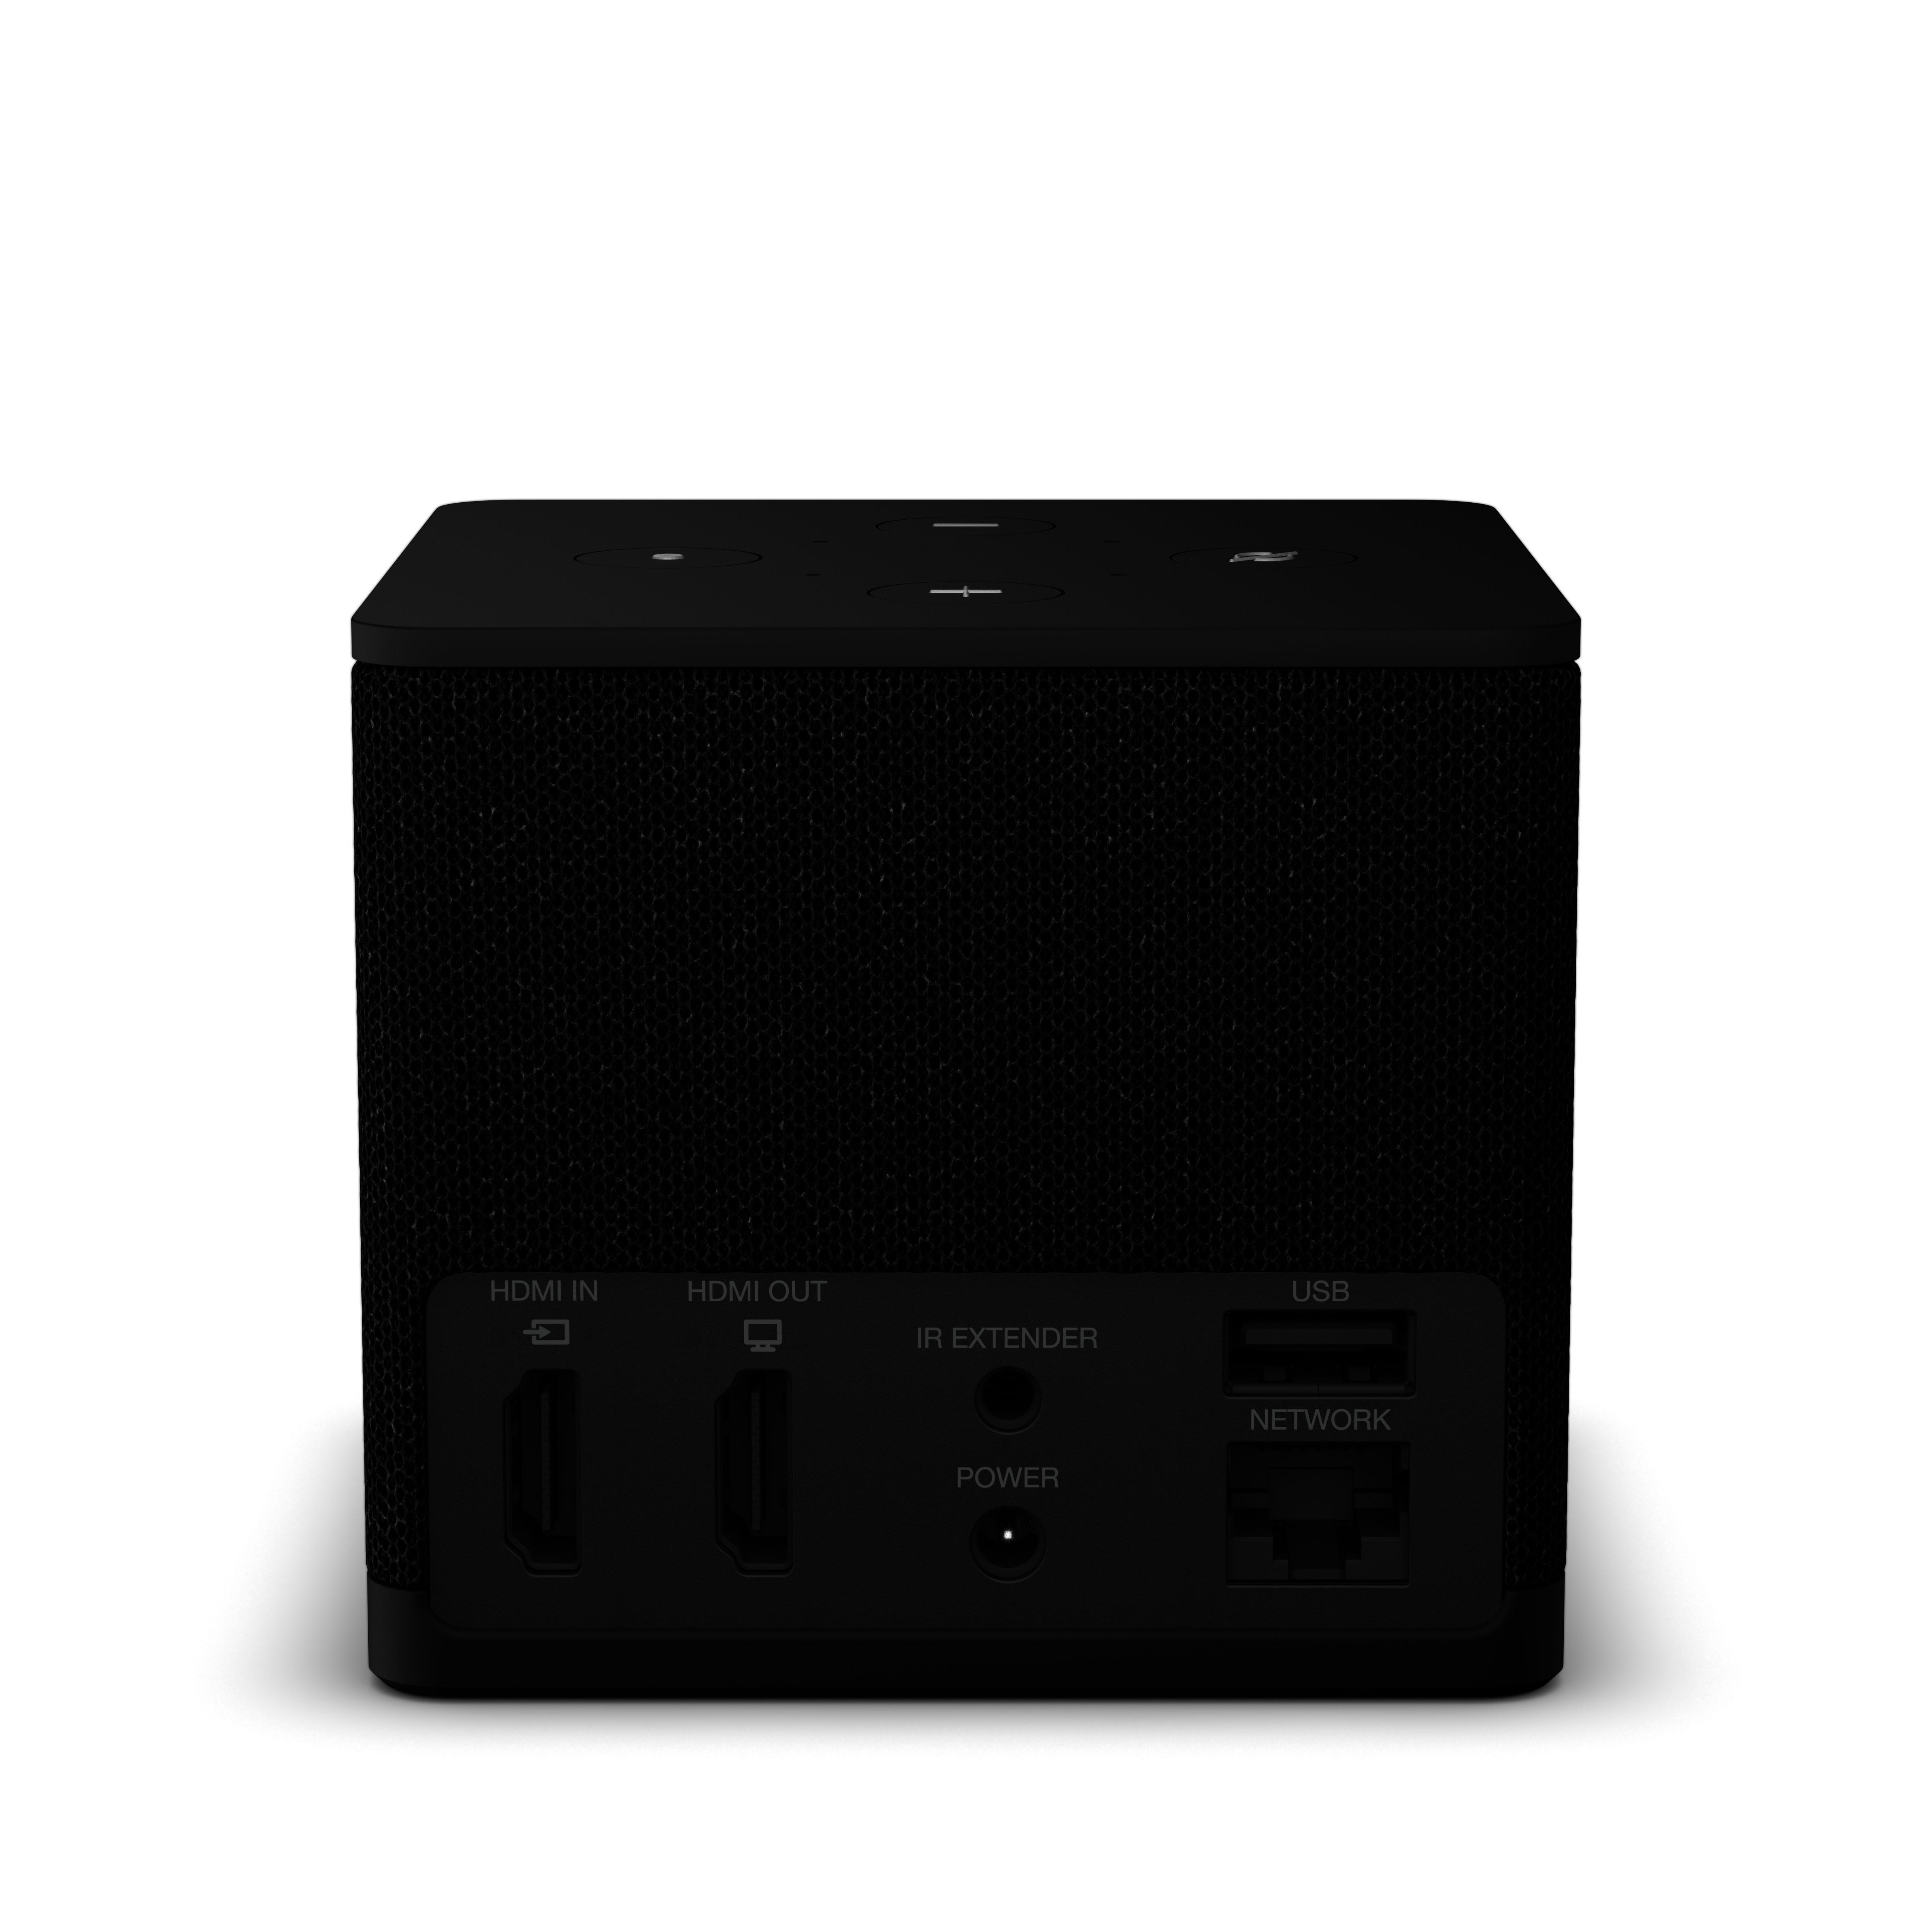 AMAZON Fire Tv Cube Streaming Black Mediaplayer